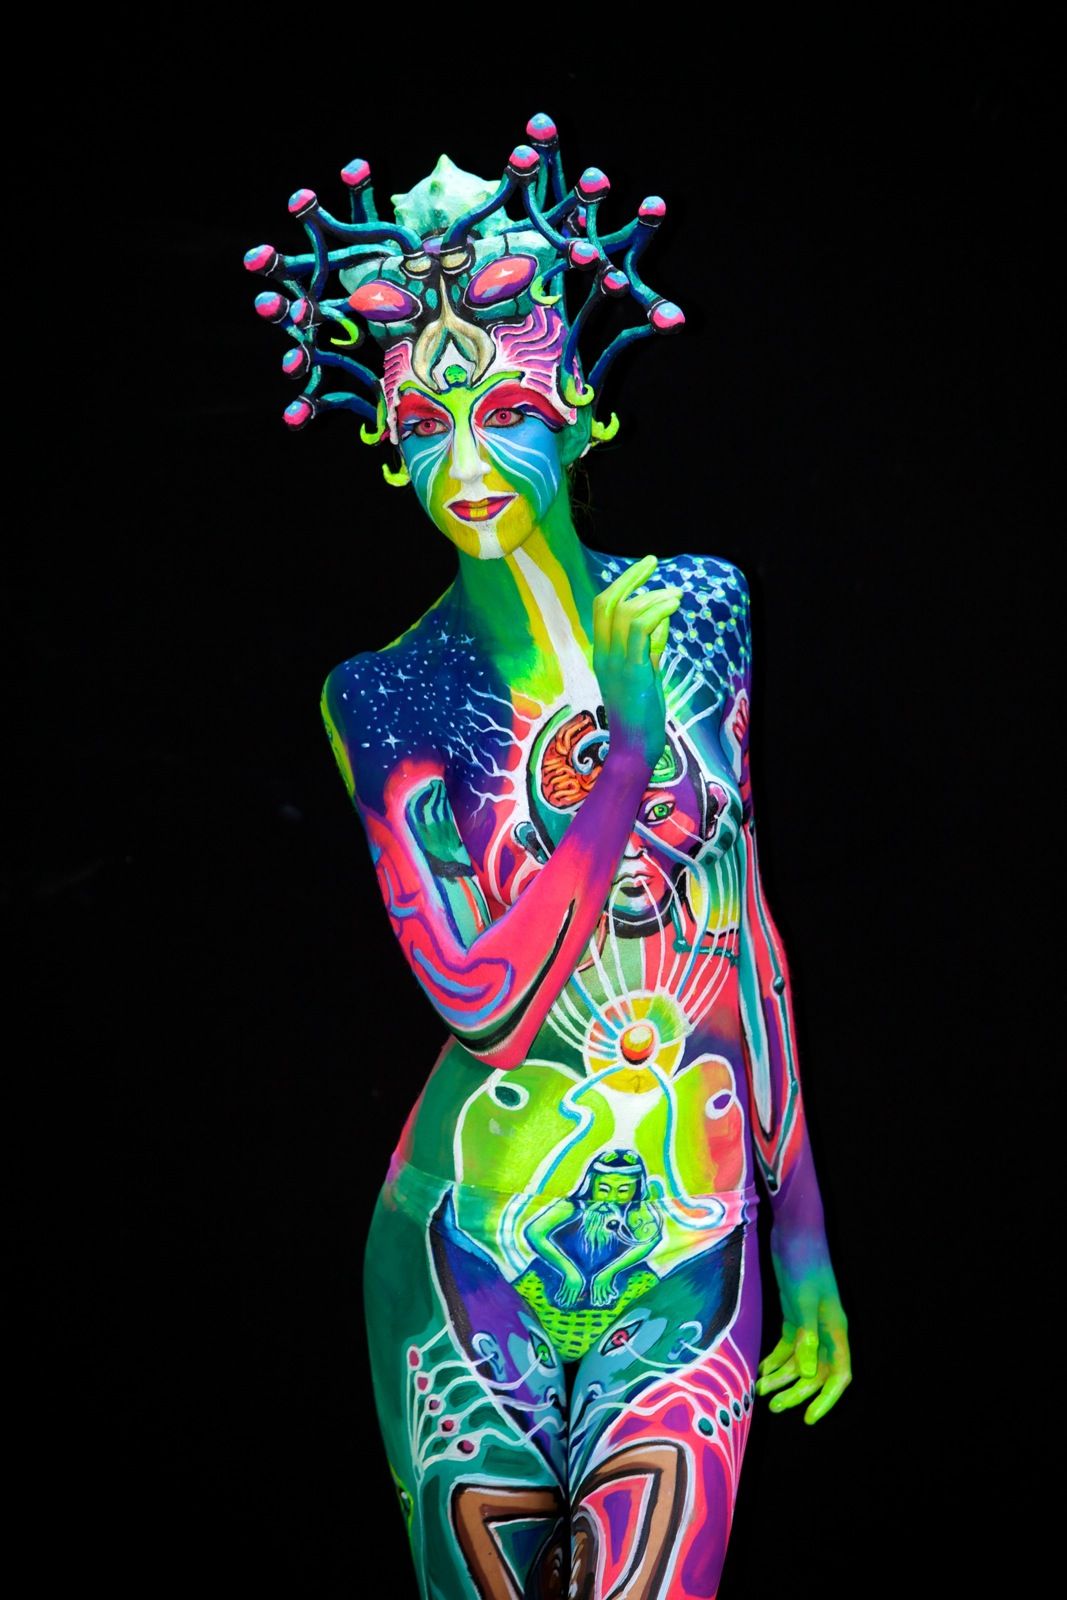 everfest these of the world bodypainting